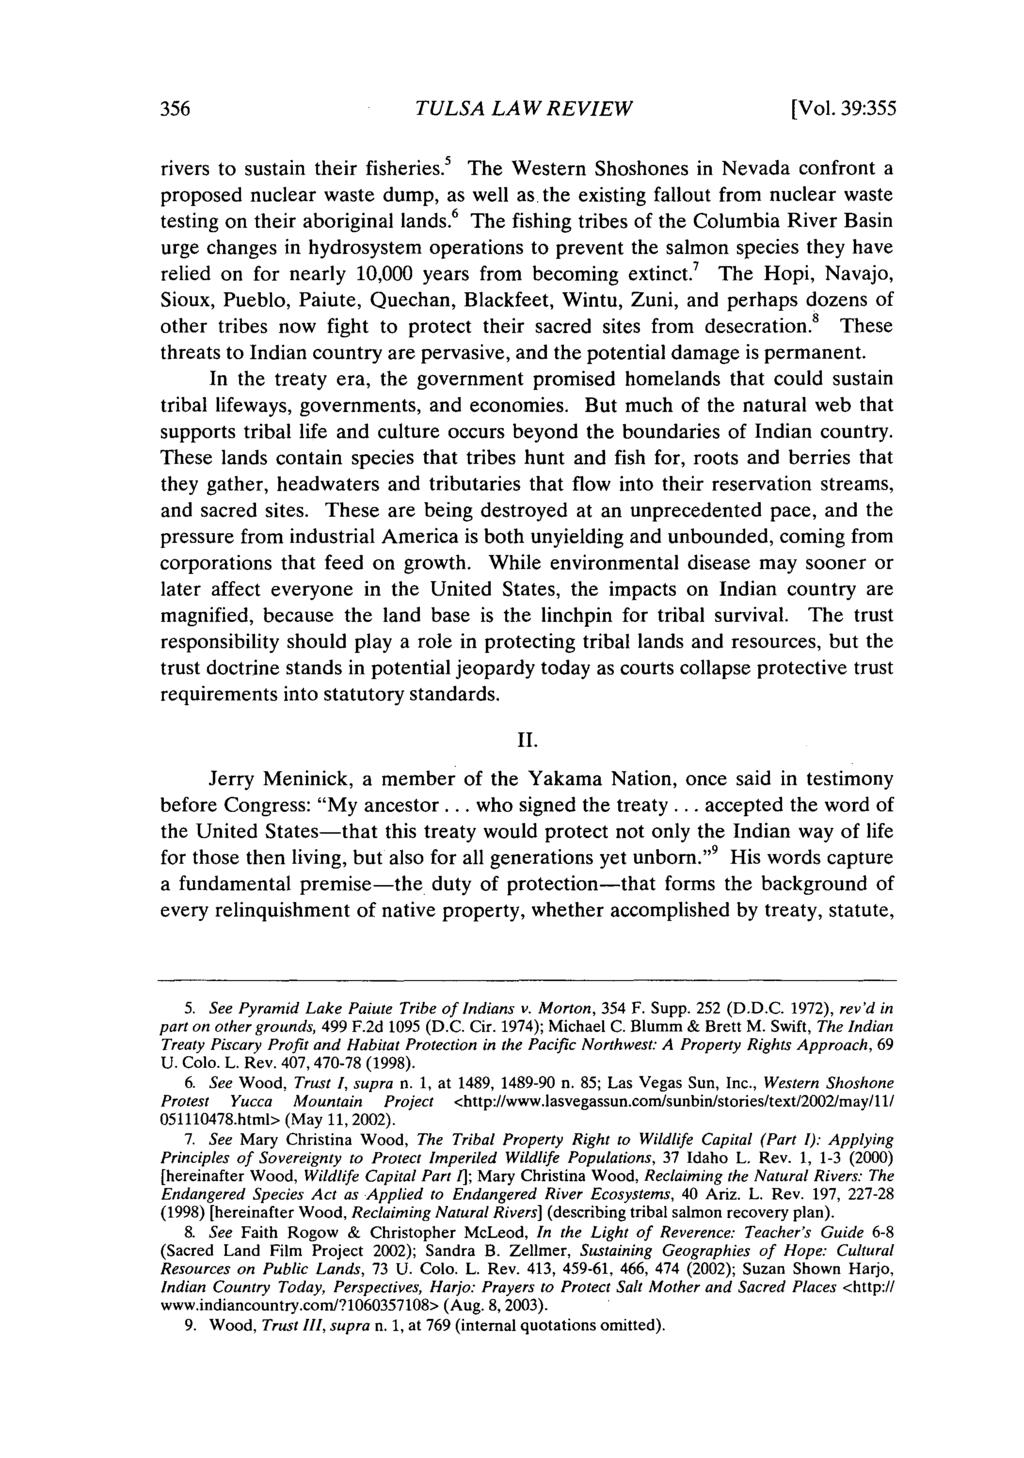 Tulsa Law Review, Vol. 39 [2003], Iss. 2, Art. 5 TULSA LAW REVIEW [Vol. 39:355 rivers to sustain their fisheries.' The Western Shoshones in Nevada confront a proposed nuclear waste dump, as well as.